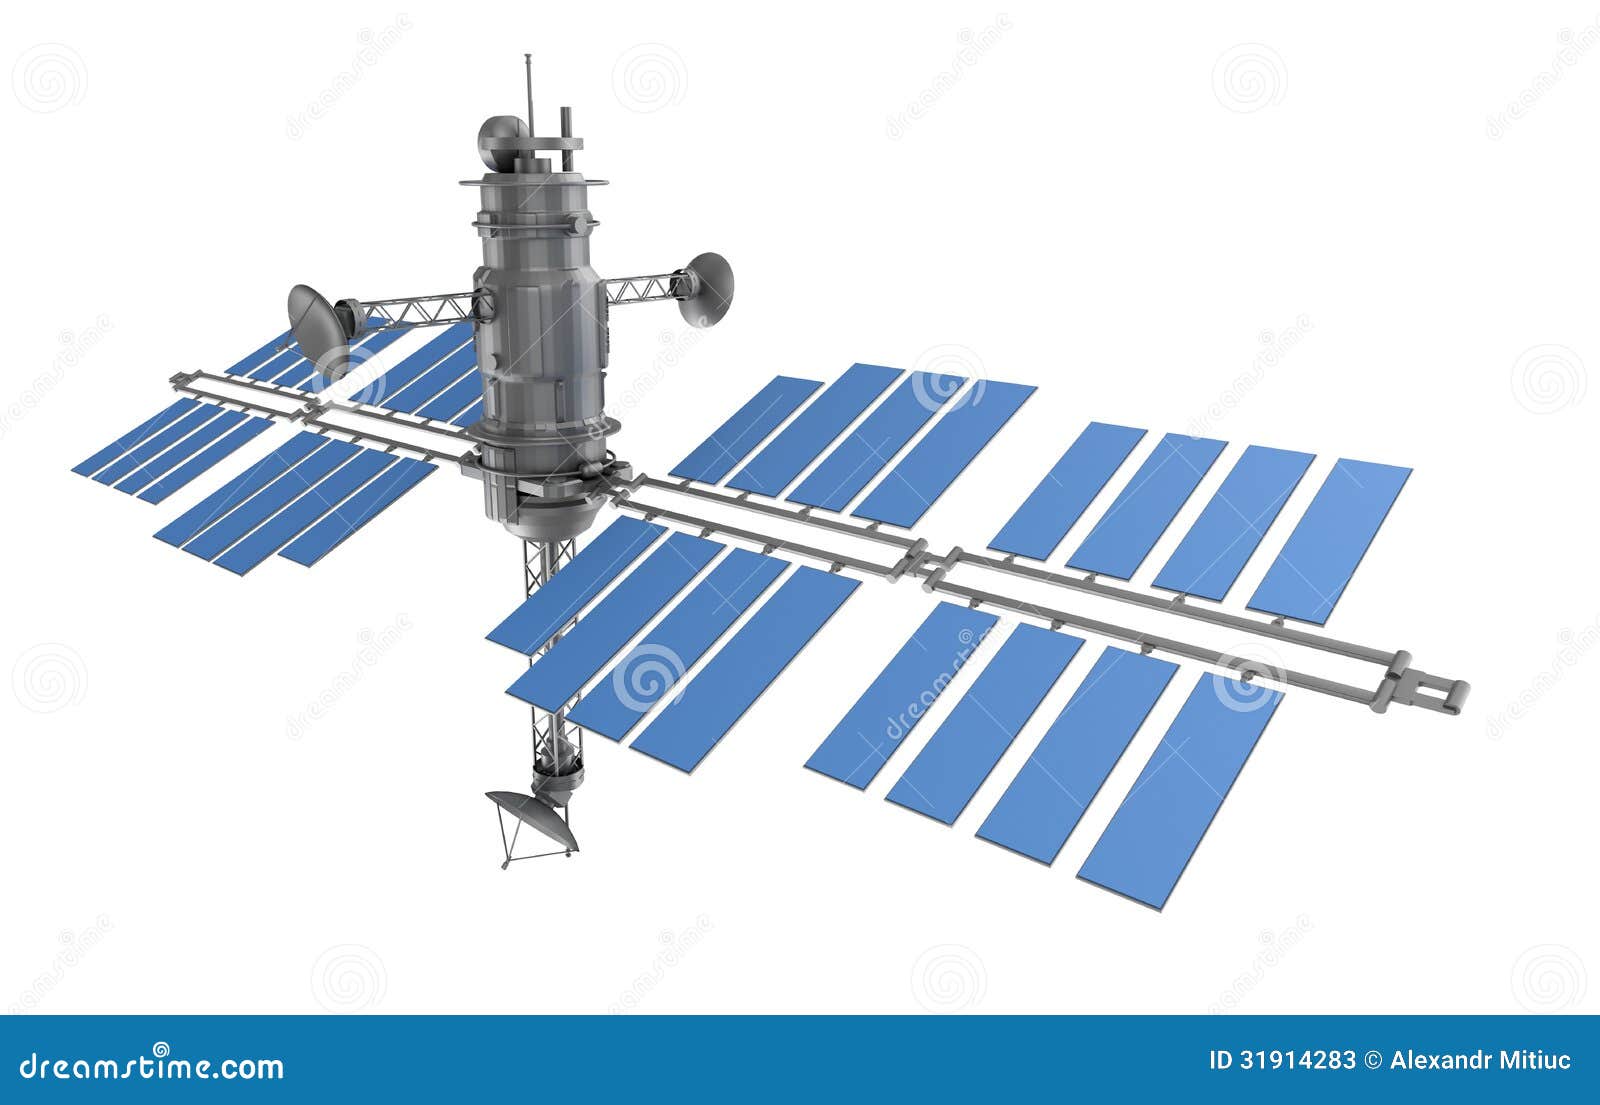 space station clip art - photo #11